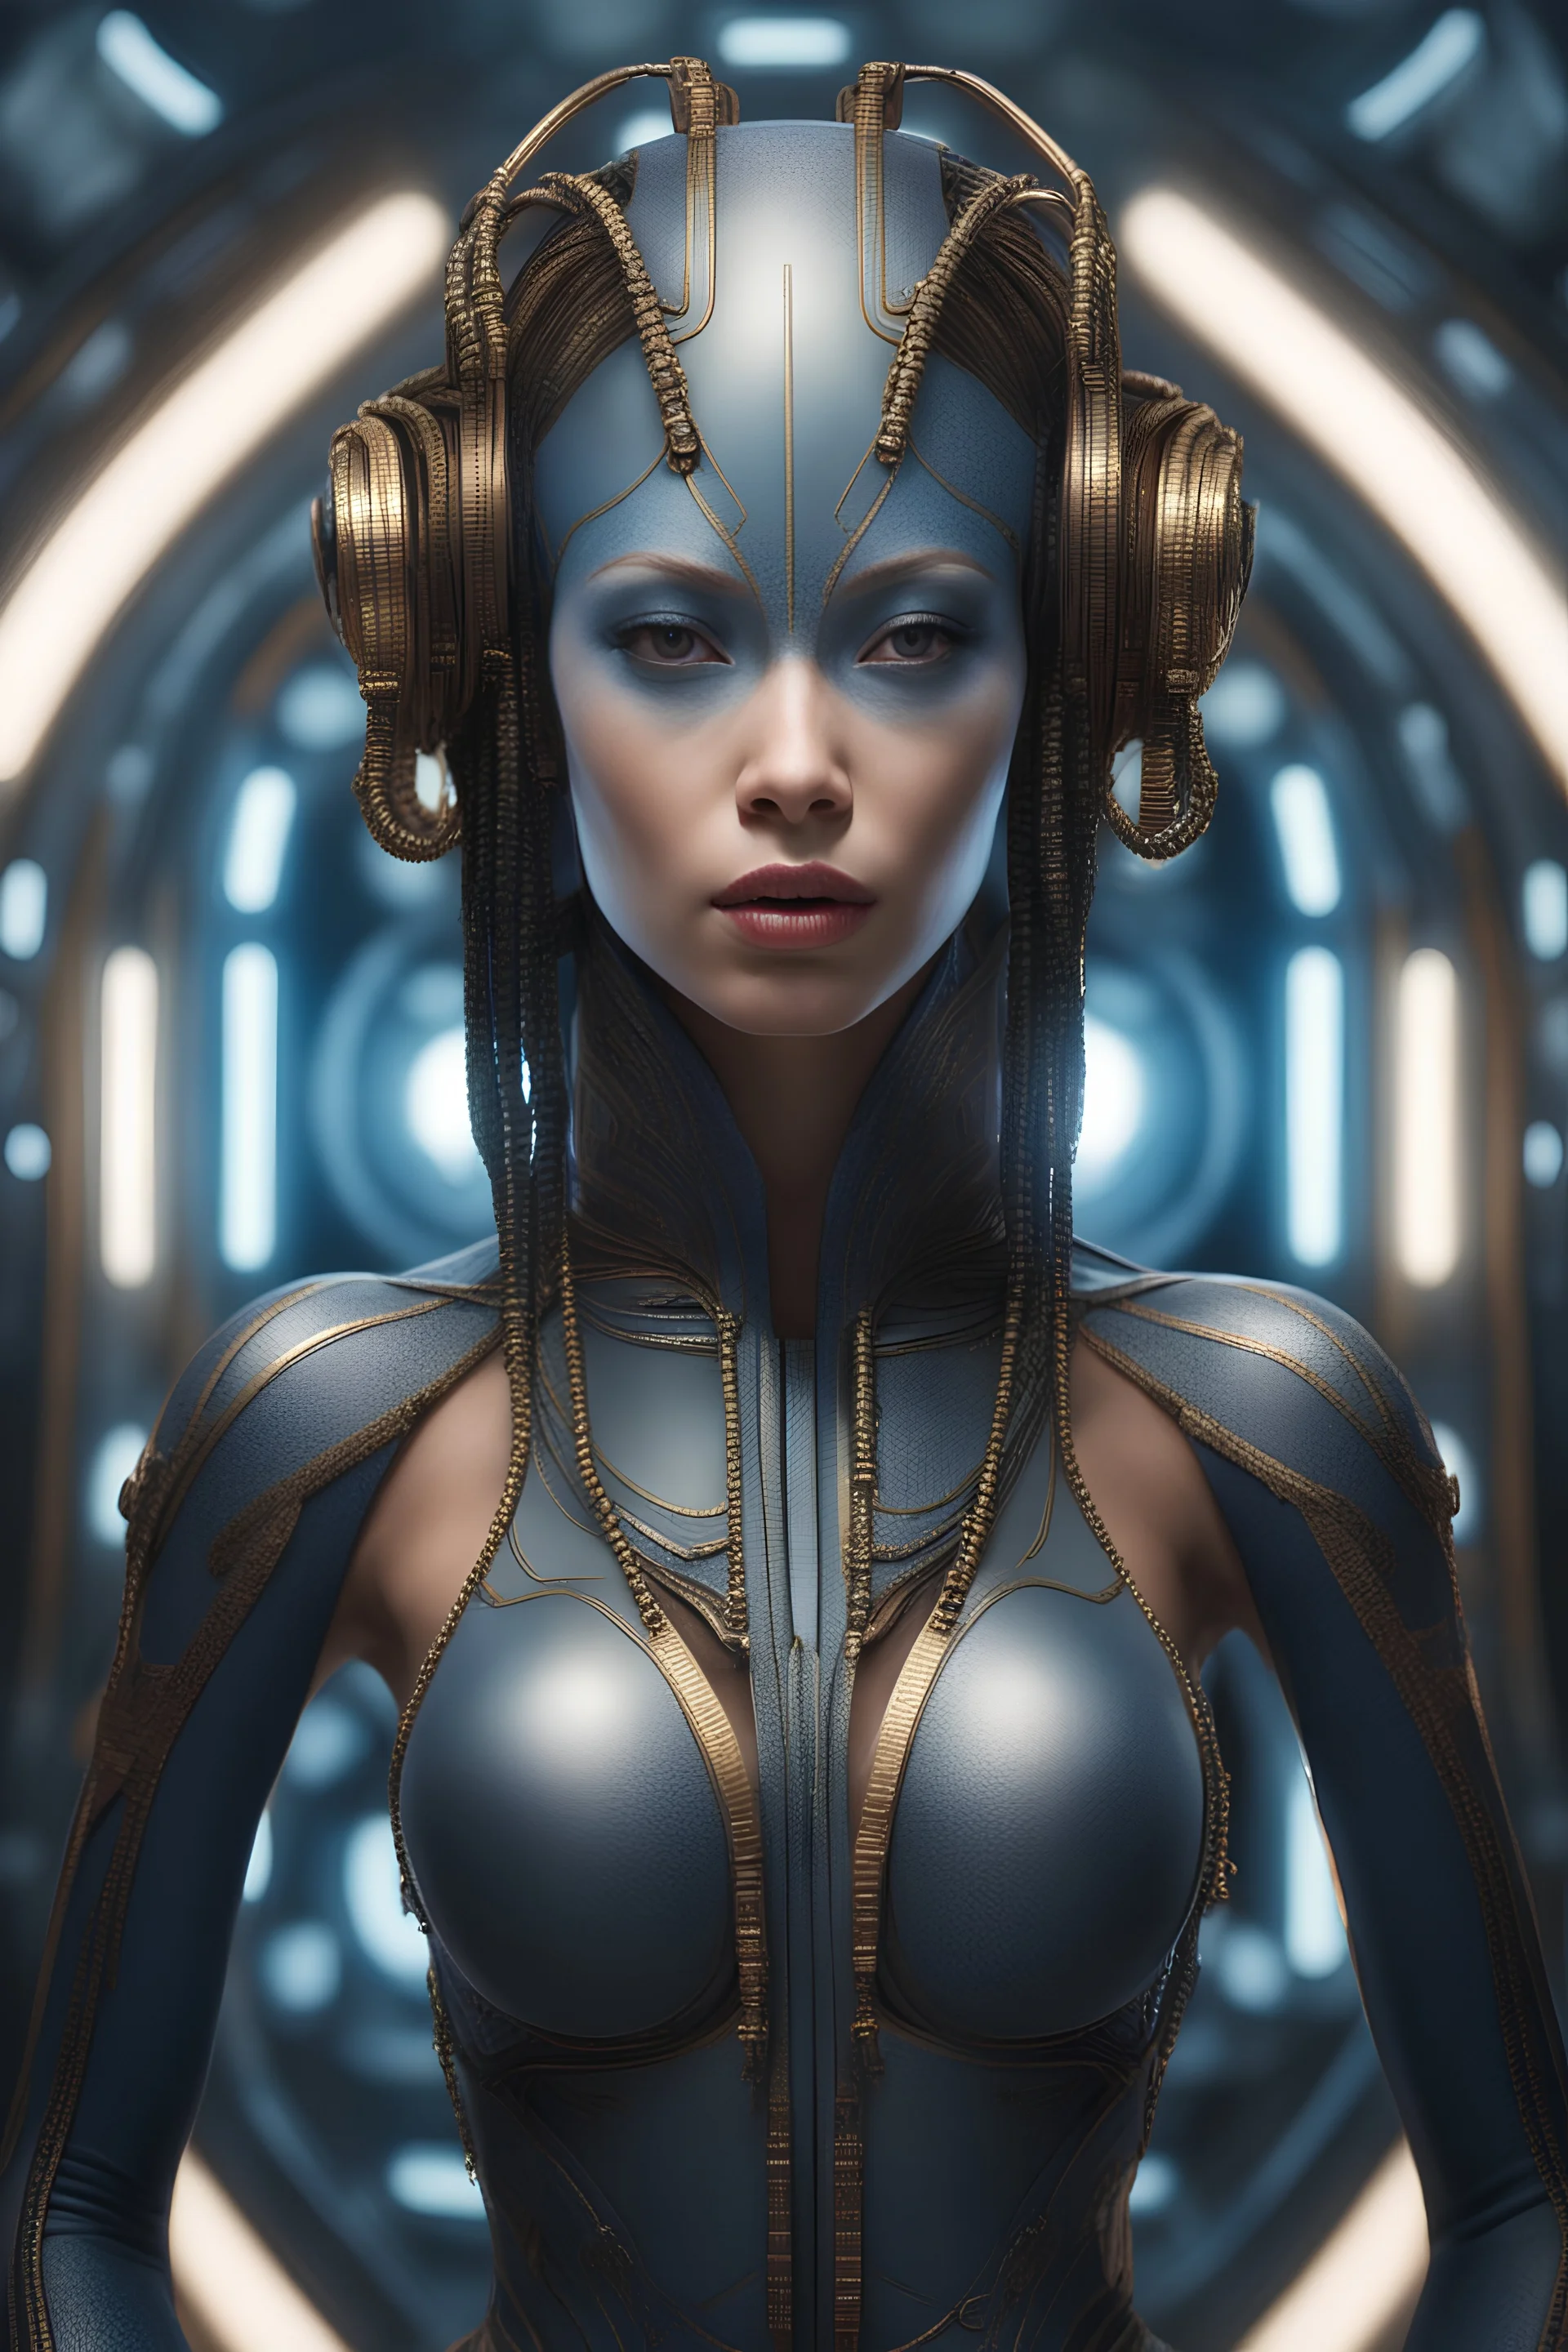 Head and shoulders image, A science-Fiction Space Opera - A long time ago in a galaxy far, far away there lived a tiny, thin, slender, little woman named Harley Marley, a voluptuous beauty , inspired by all the works of art in the world, Absolute Reality, Reality engine, Realistic stock photo 1080p, 32k UHD, Hyper realistic, photorealistic, well-shaped, perfect figure, perfect face, laughing, a multicolored, watercolor stained, wall in the background,